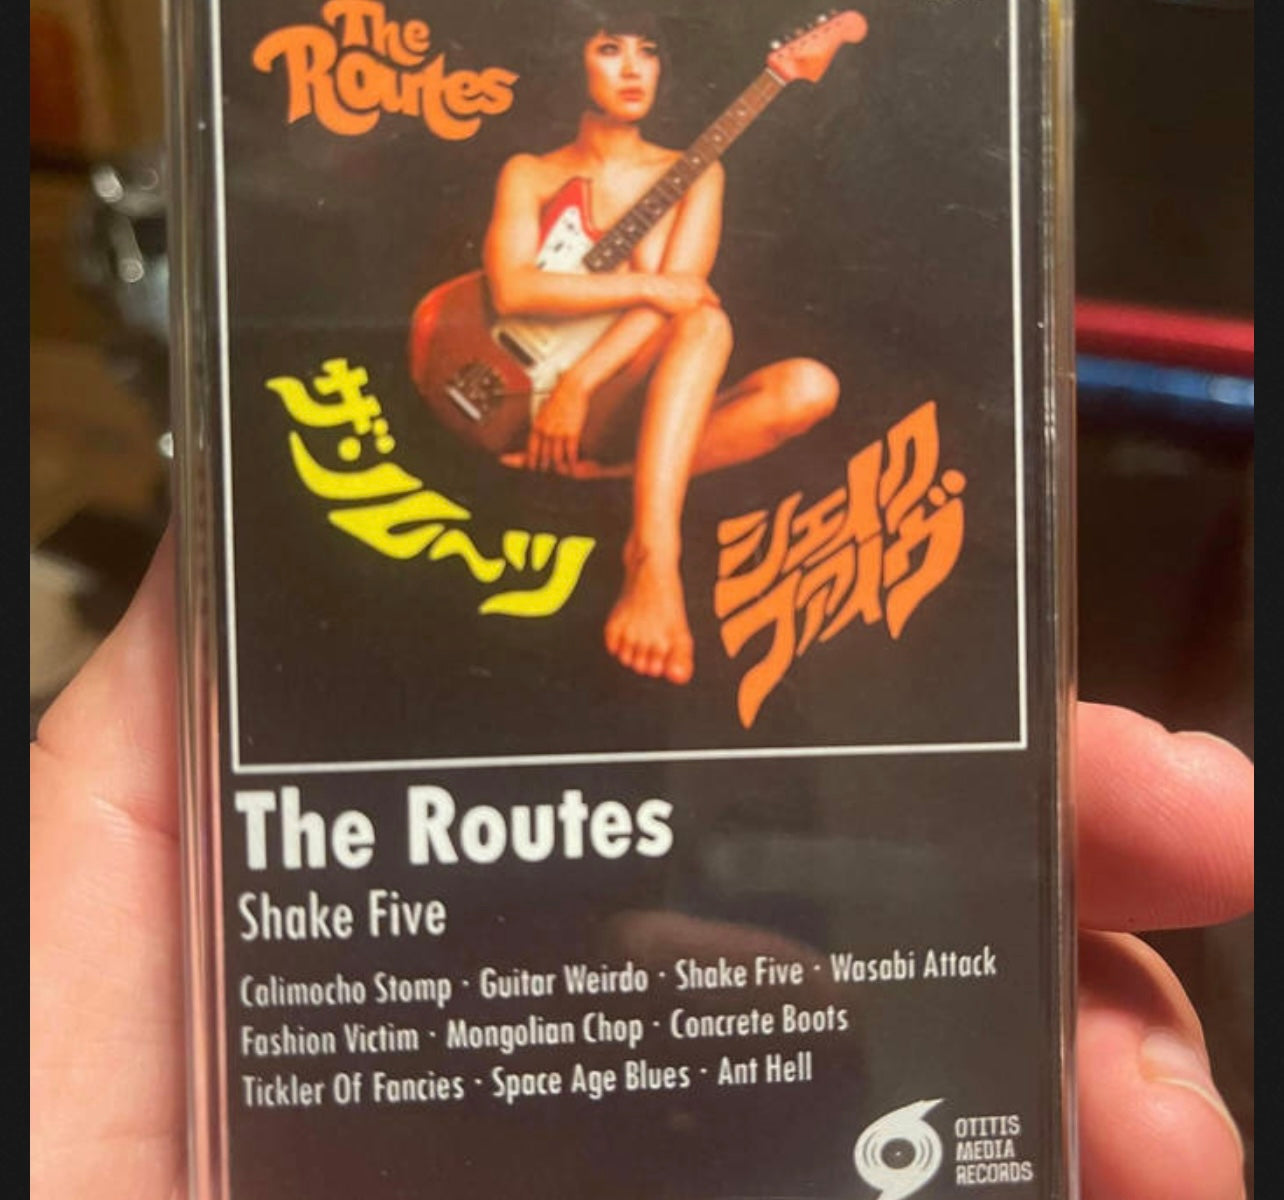 OMR-042 THE ROUTES “Shake Five” CASSETTE TAPES